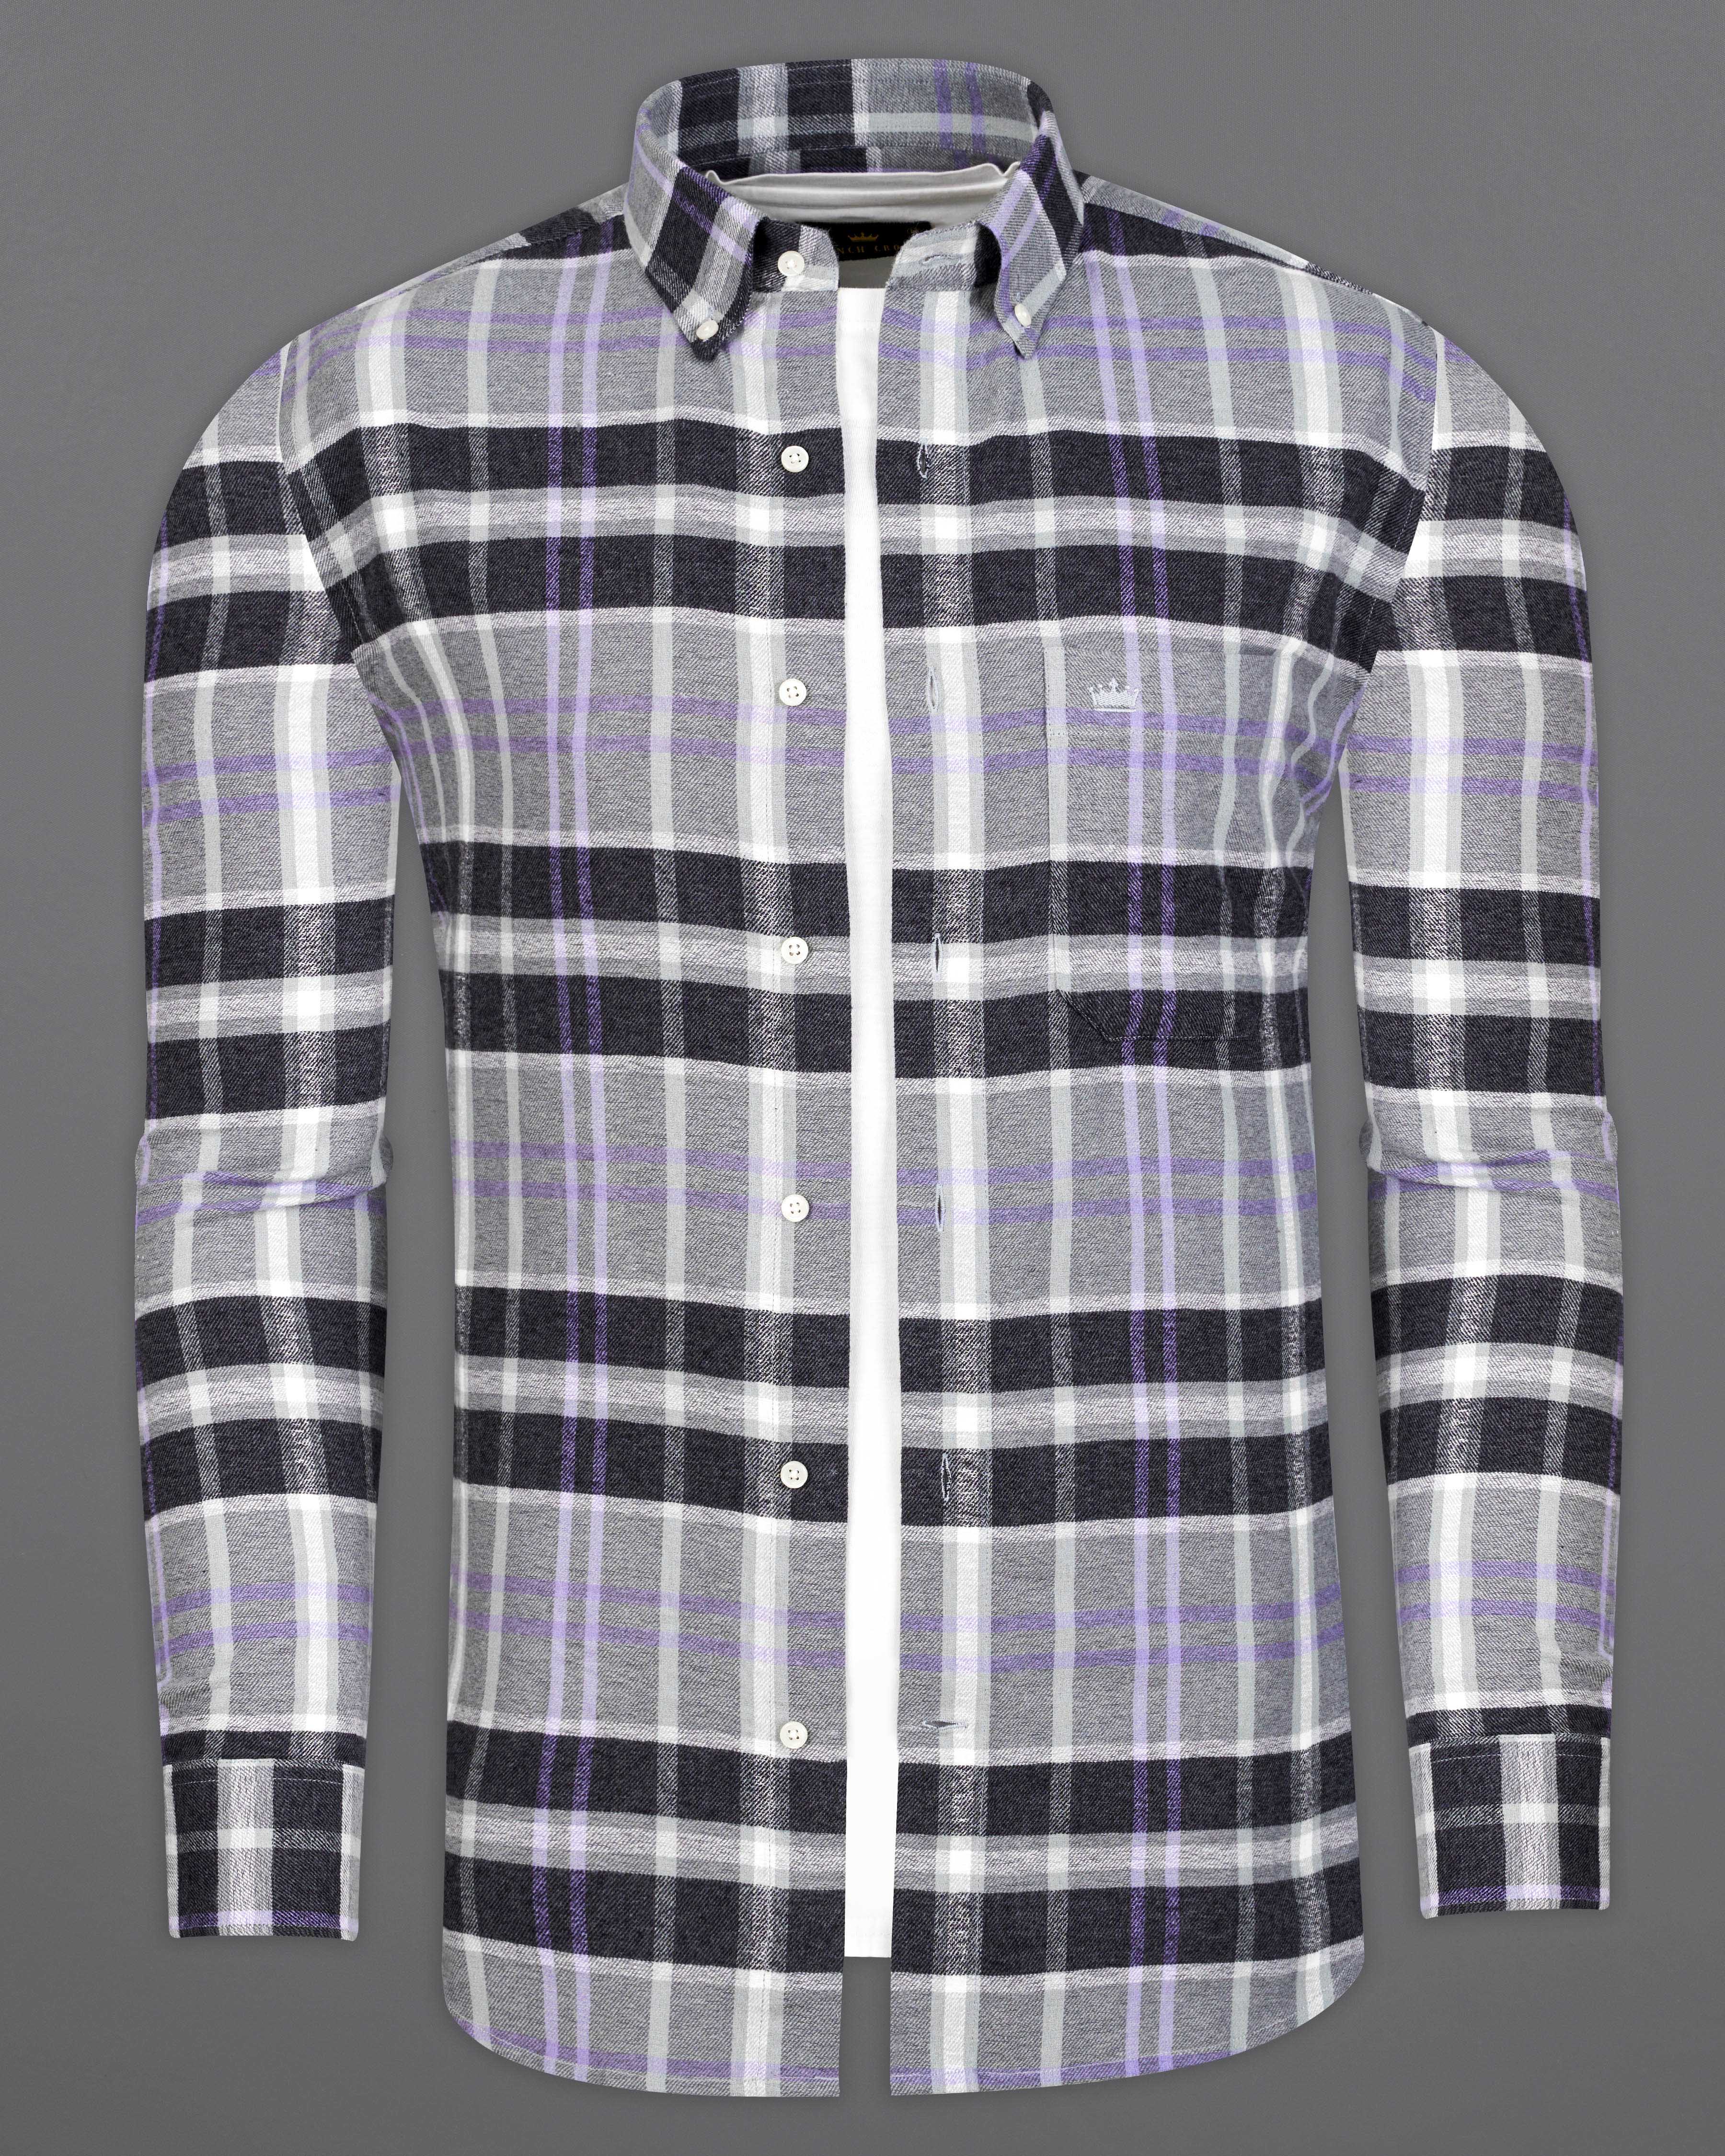 Thunder Black with Spring Gray Checkered Flannel OverShirt 9604-BD-OS-38,9604-BD-OS-H-38,9604-BD-OS-39,9604-BD-OS-H-39,9604-BD-OS-40,9604-BD-OS-H-40,9604-BD-OS-42,9604-BD-OS-H-42,9604-BD-OS-44,9604-BD-OS-H-44,9604-BD-OS-46,9604-BD-OS-H-46,9604-BD-OS-48,9604-BD-OS-H-48,9604-BD-OS-50,9604-BD-OS-H-50,9604-BD-OS-52,9604-BD-OS-H-52